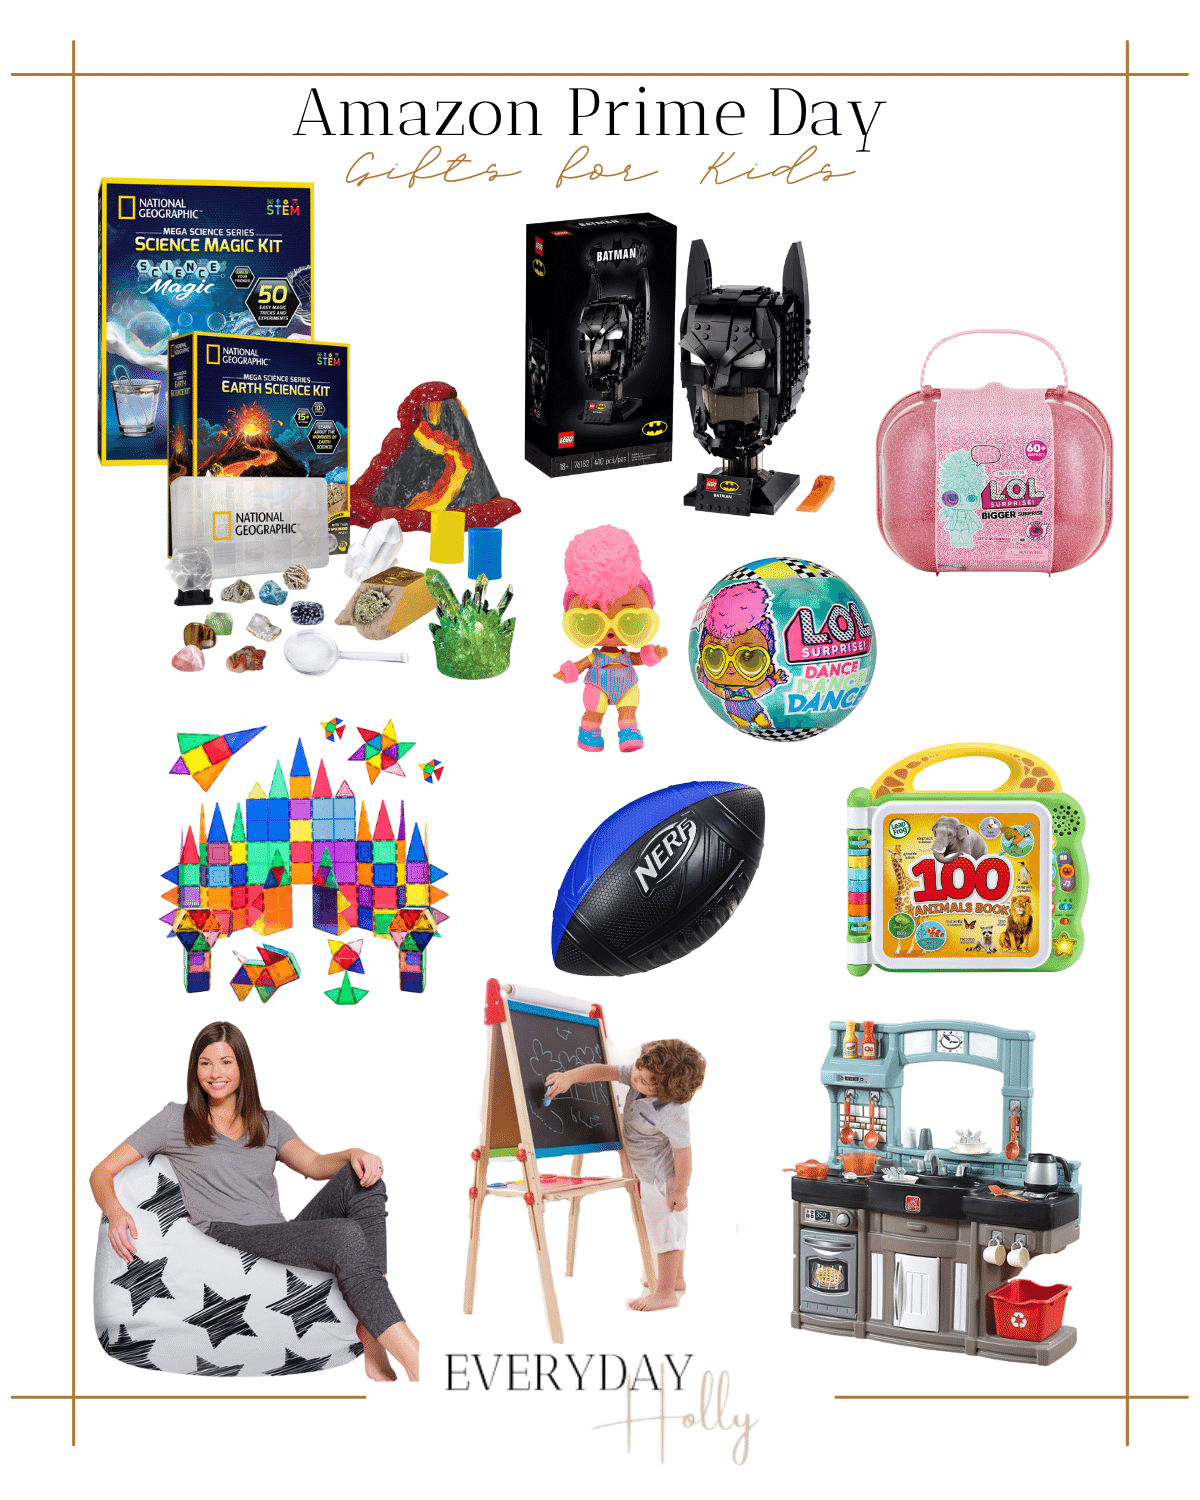 amazon gifts for kids, science magic kit, science volcano & rock kit, lego batman, LOL surpise case, LOL dancing doll, magnetic colored tiles, nerf football, 100 animals book, bean bag, chalk board, kids kitchen play set 